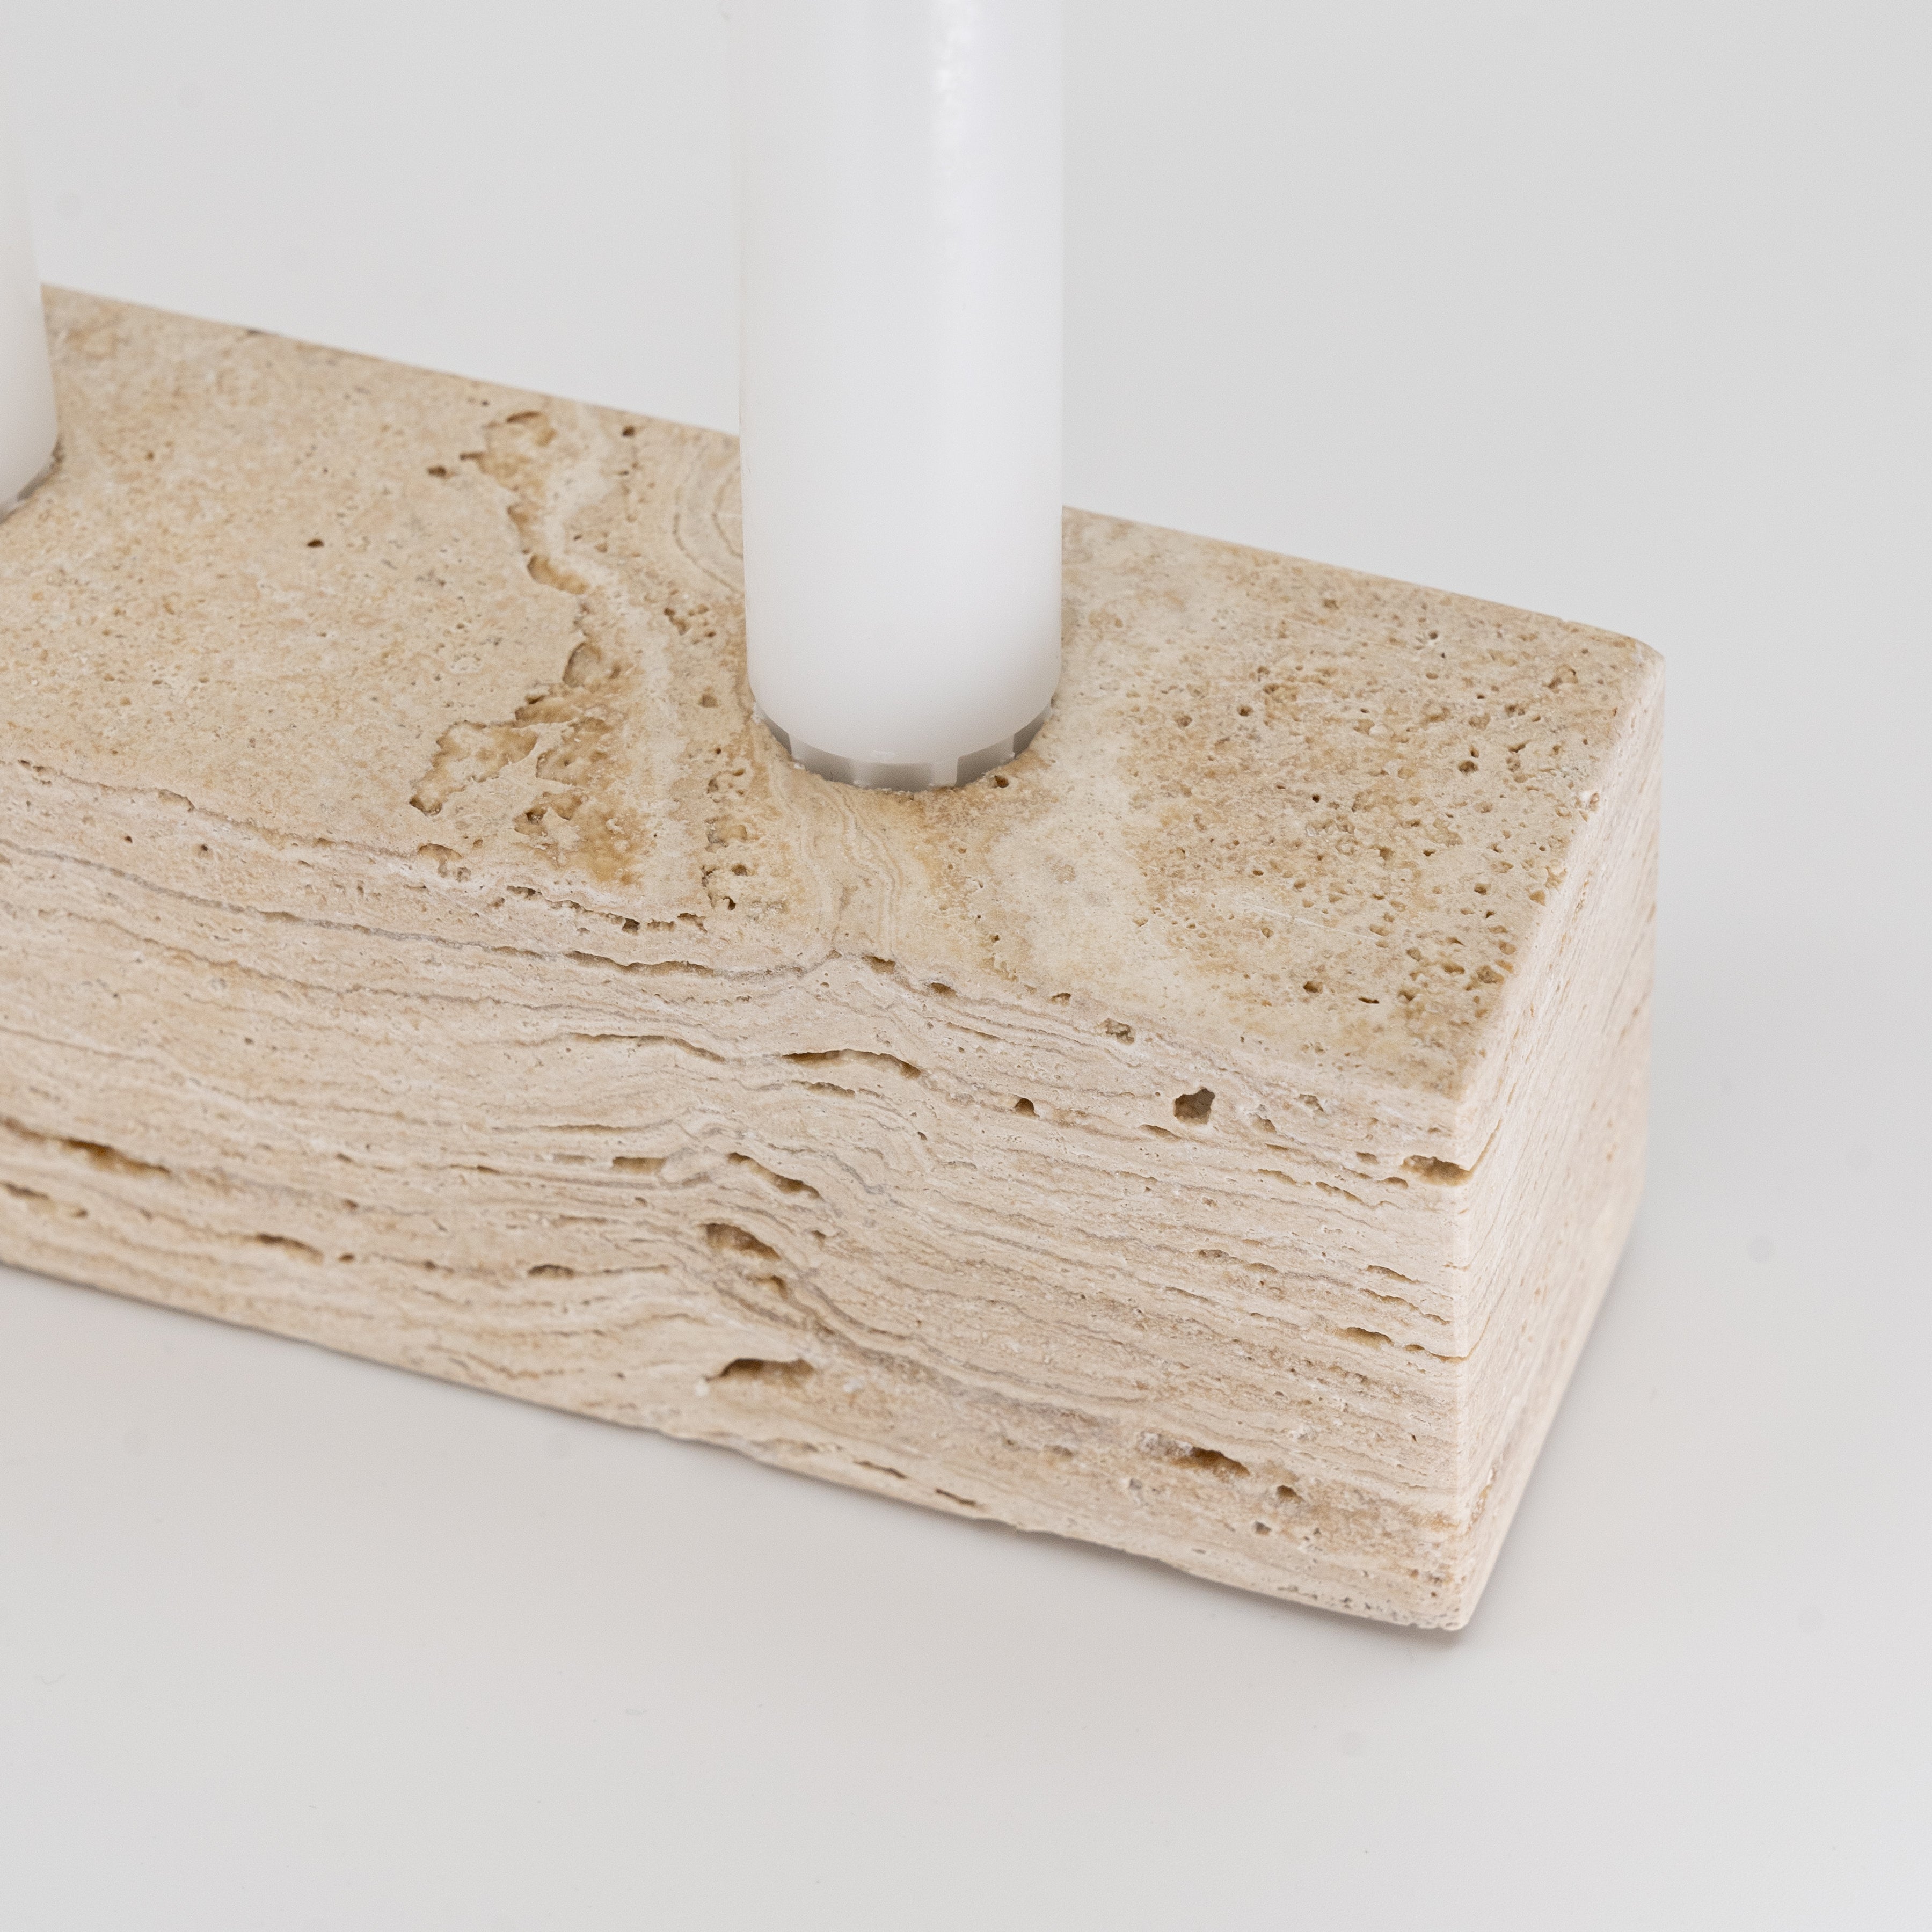 Domino Candle Holder  - WS Living - UAE - de Wood and steel Furnitures - Dubai